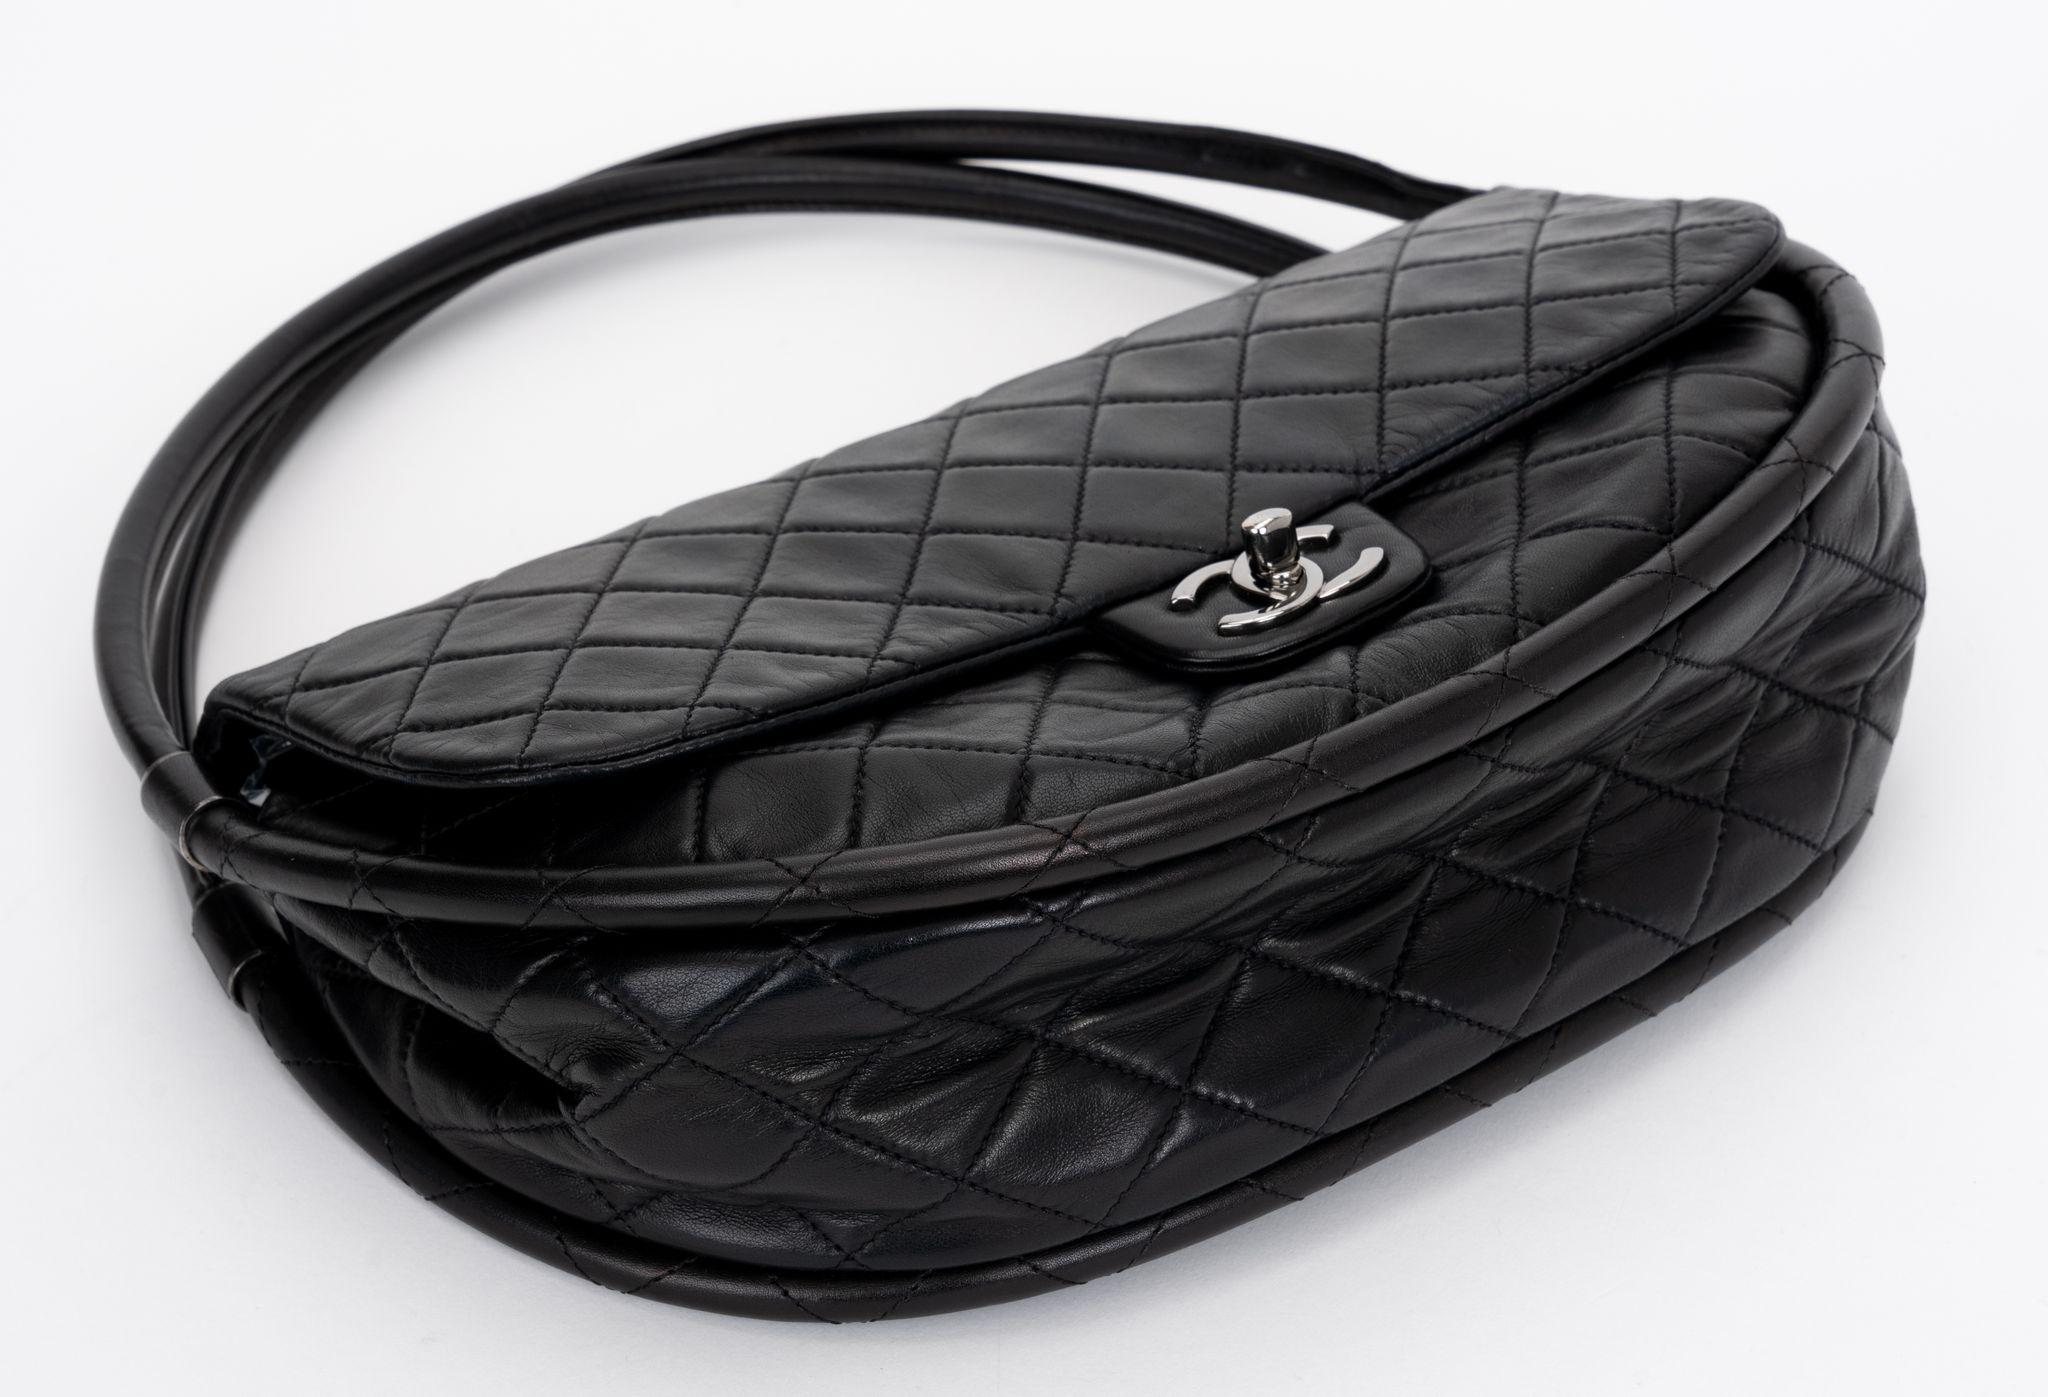 Women's Chanel Collectible Black Hula Hoop Bag For Sale